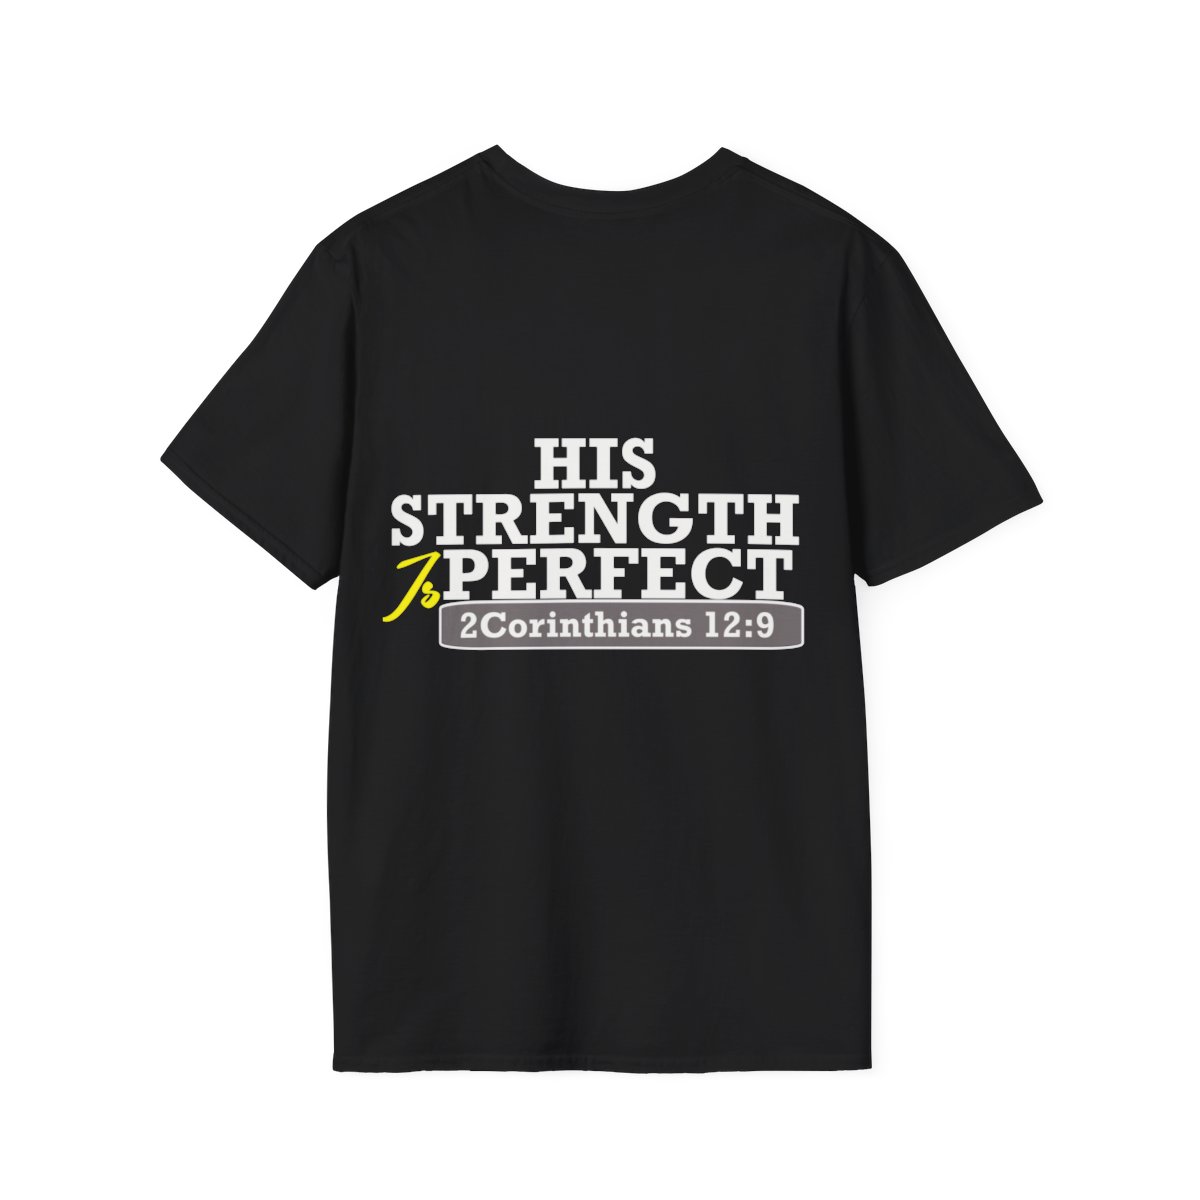 Cross Training Tees (Limited Release/Deep Discounts) product thumbnail image